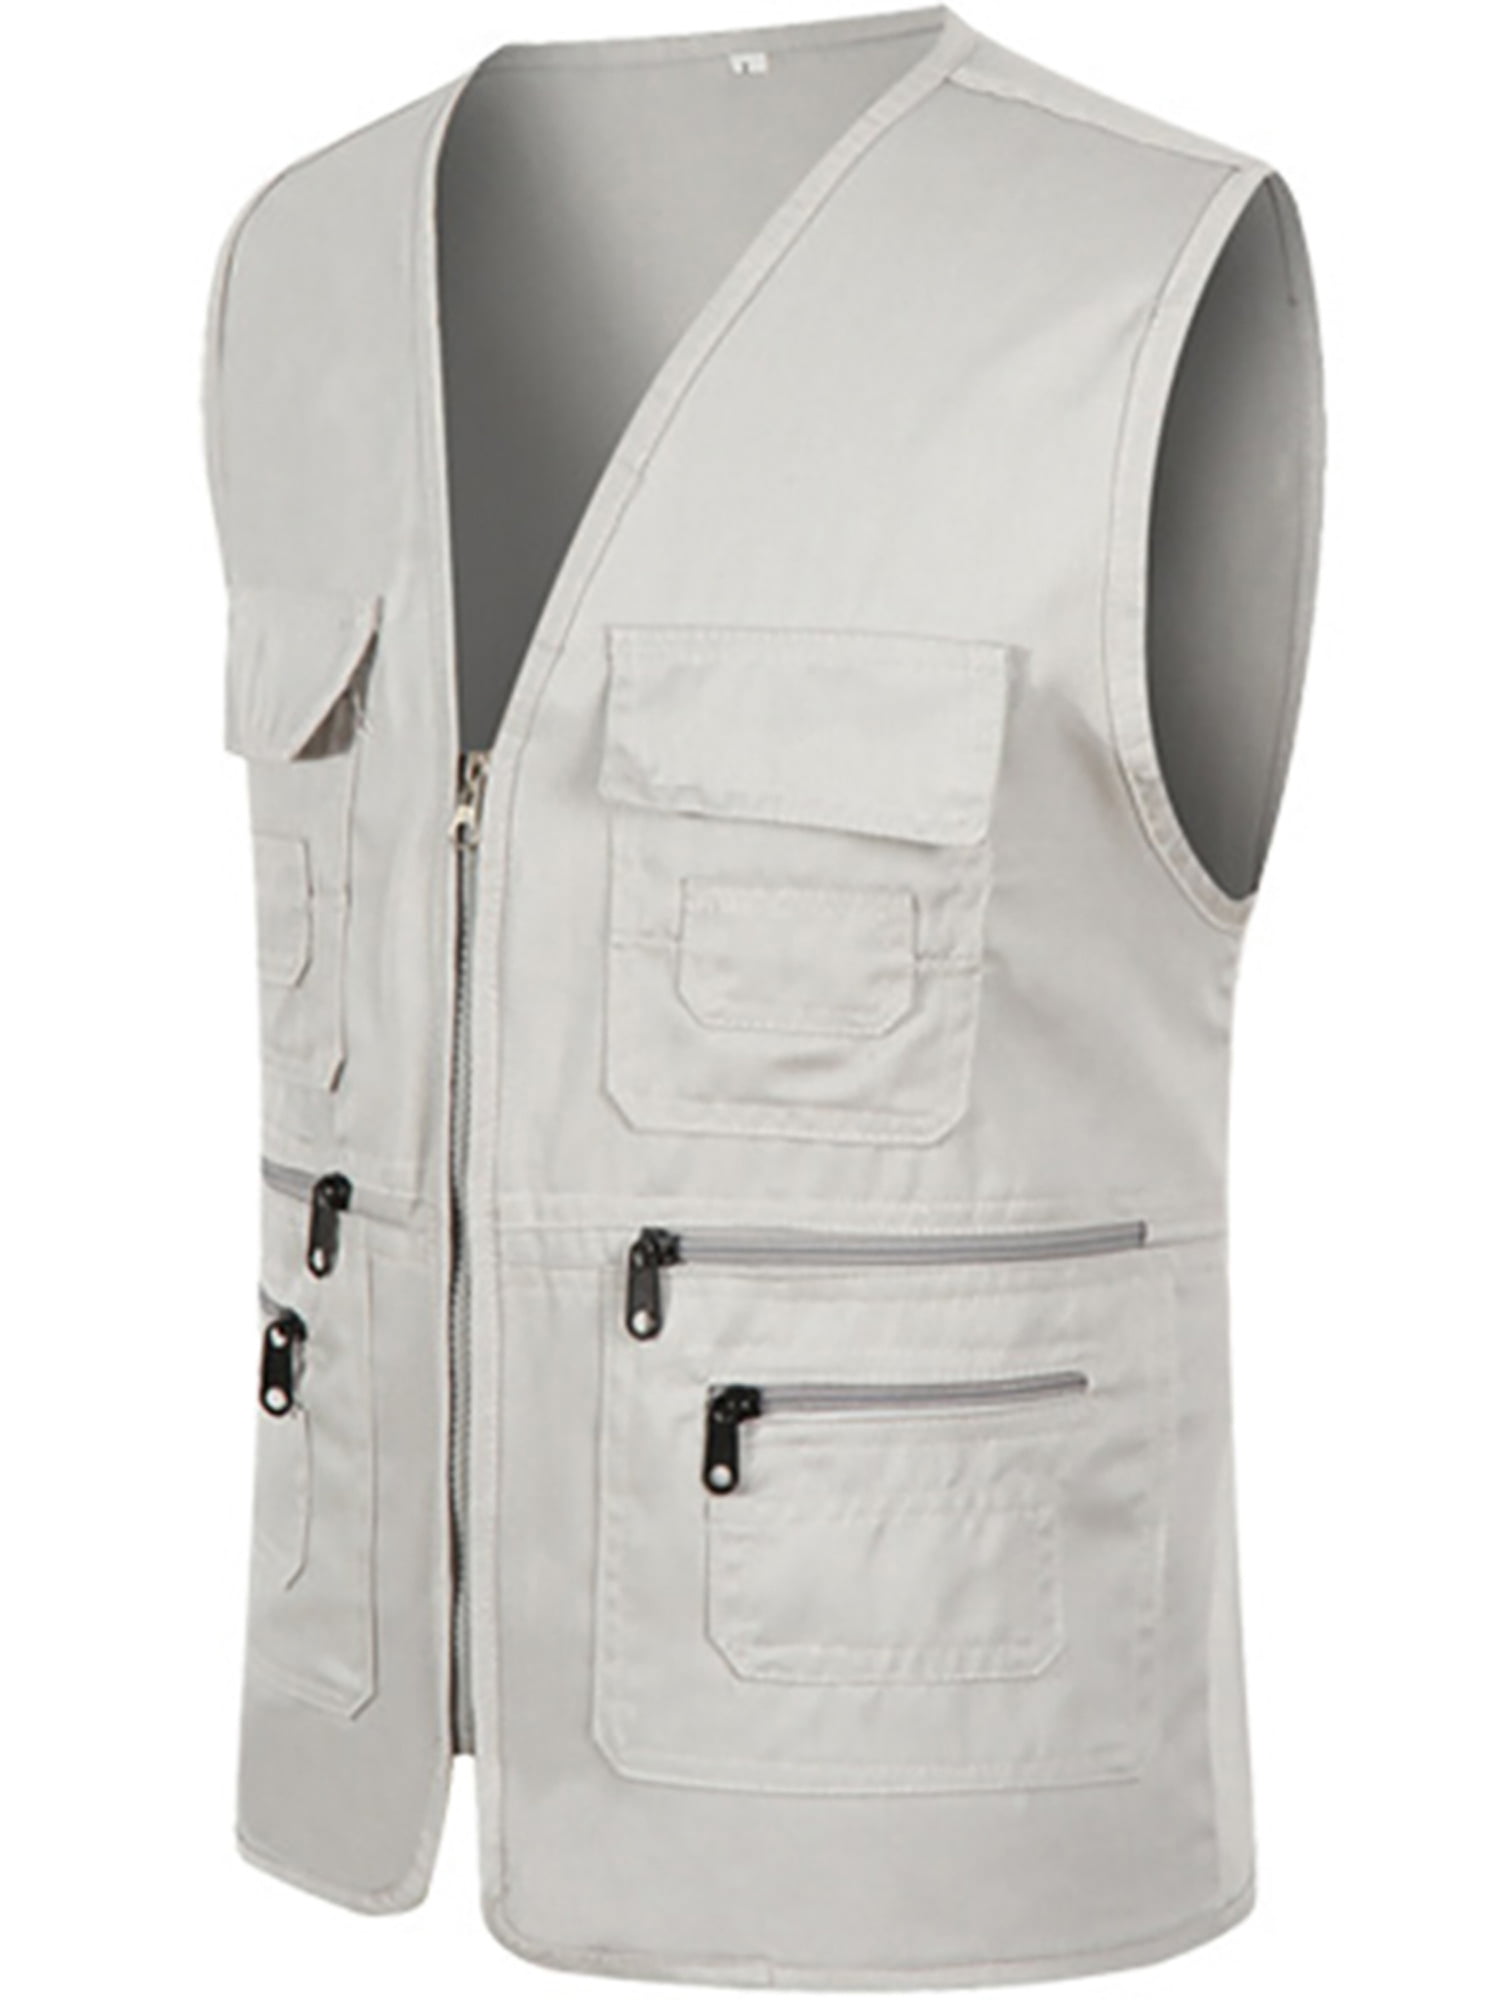 Details about   Wireless Tactics Safety Vest Security Waistcoat for Men Women w/ Multi pockets 